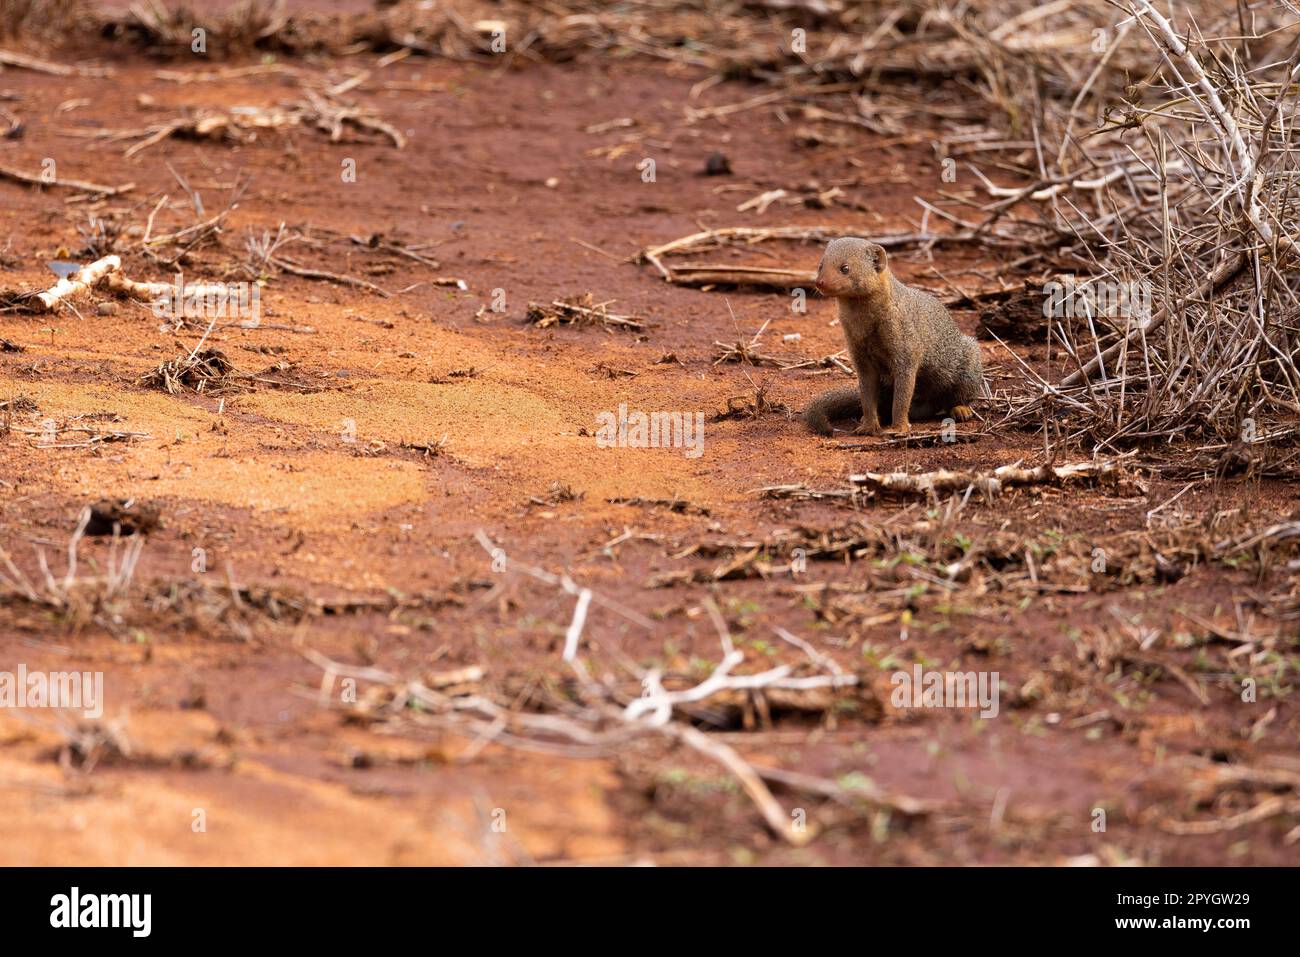 This photo captures the playful and curious nature of the mongoose, as it sits attentively on the savannah grasses of the Kenyan Tsavo East reserve. I Stock Photo